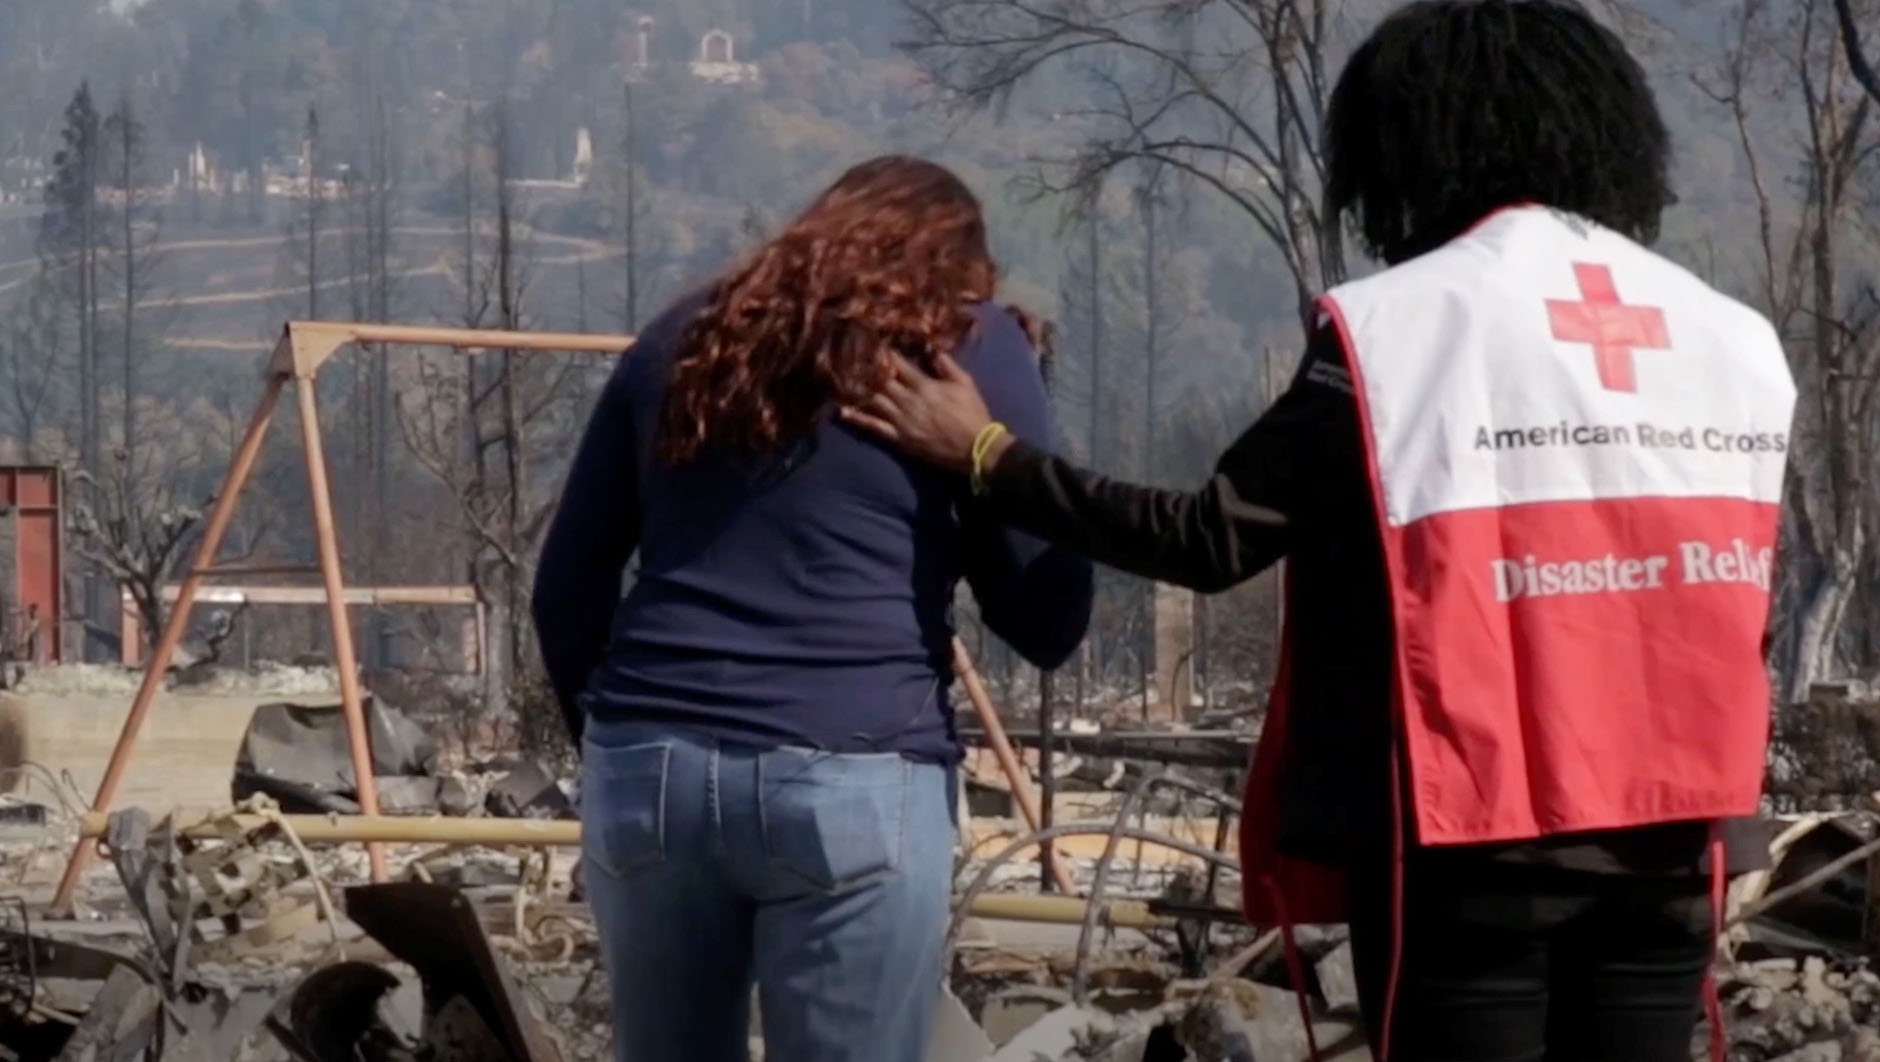 A volunteer wearing a Red Cross vest comforts someone at the scene of a disaster